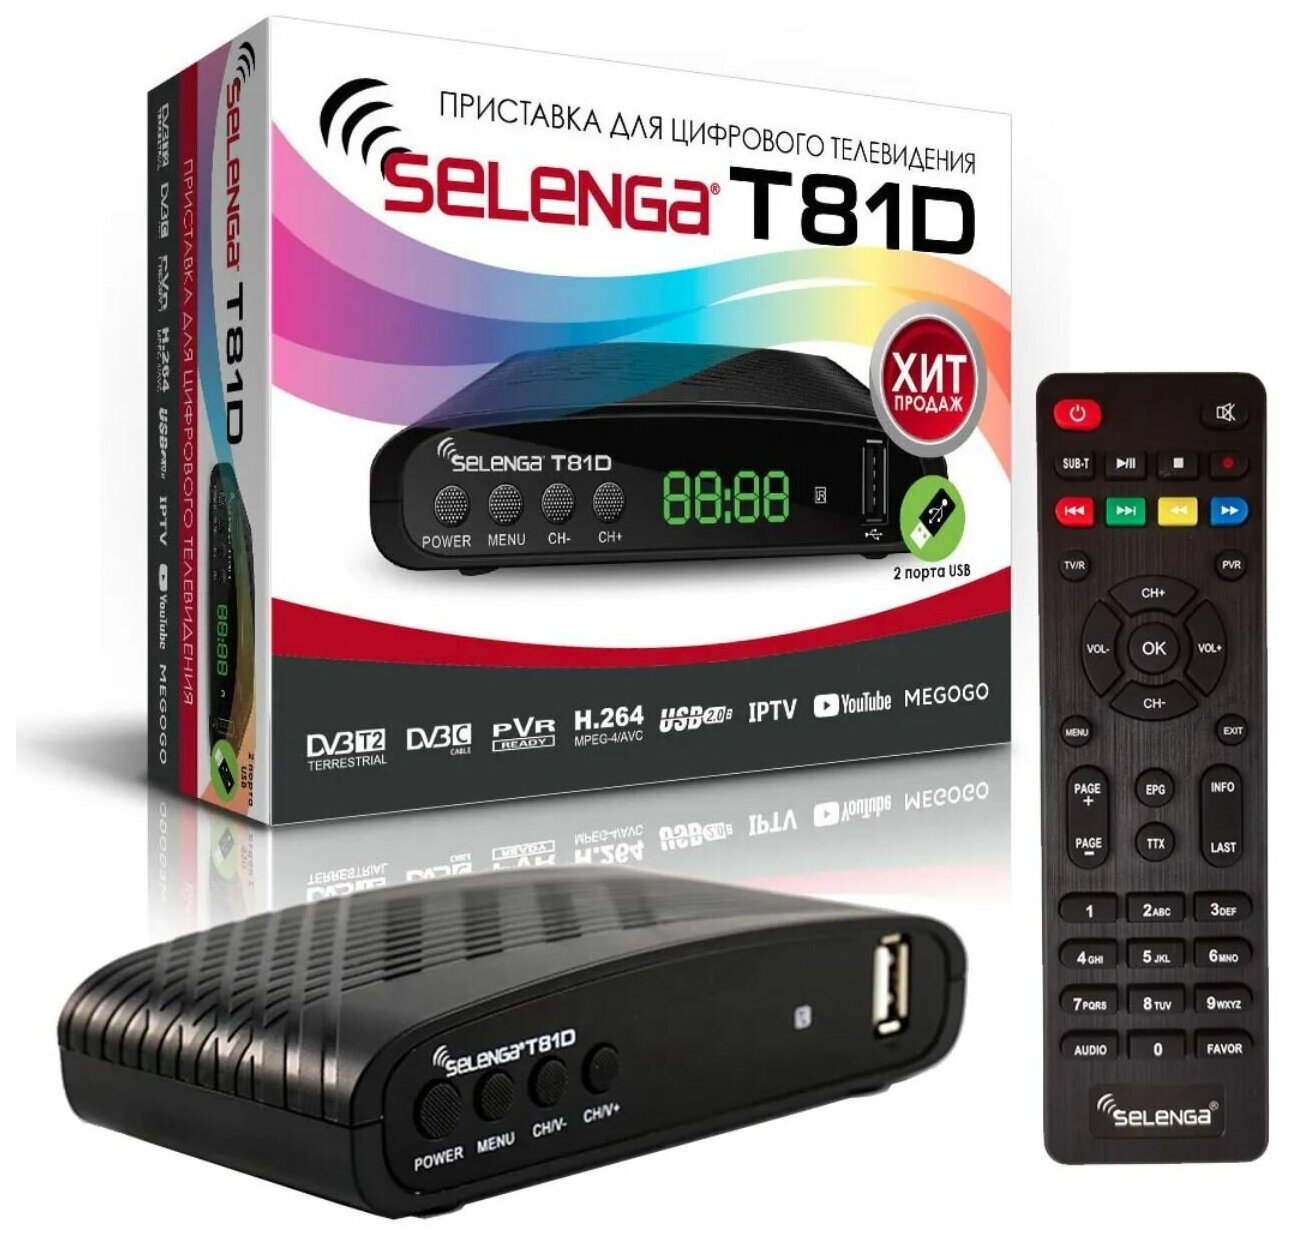 ТВ-тюнер Selenga T81D (2xUSB Ant in Ant out HDMI IR in AV out jack)